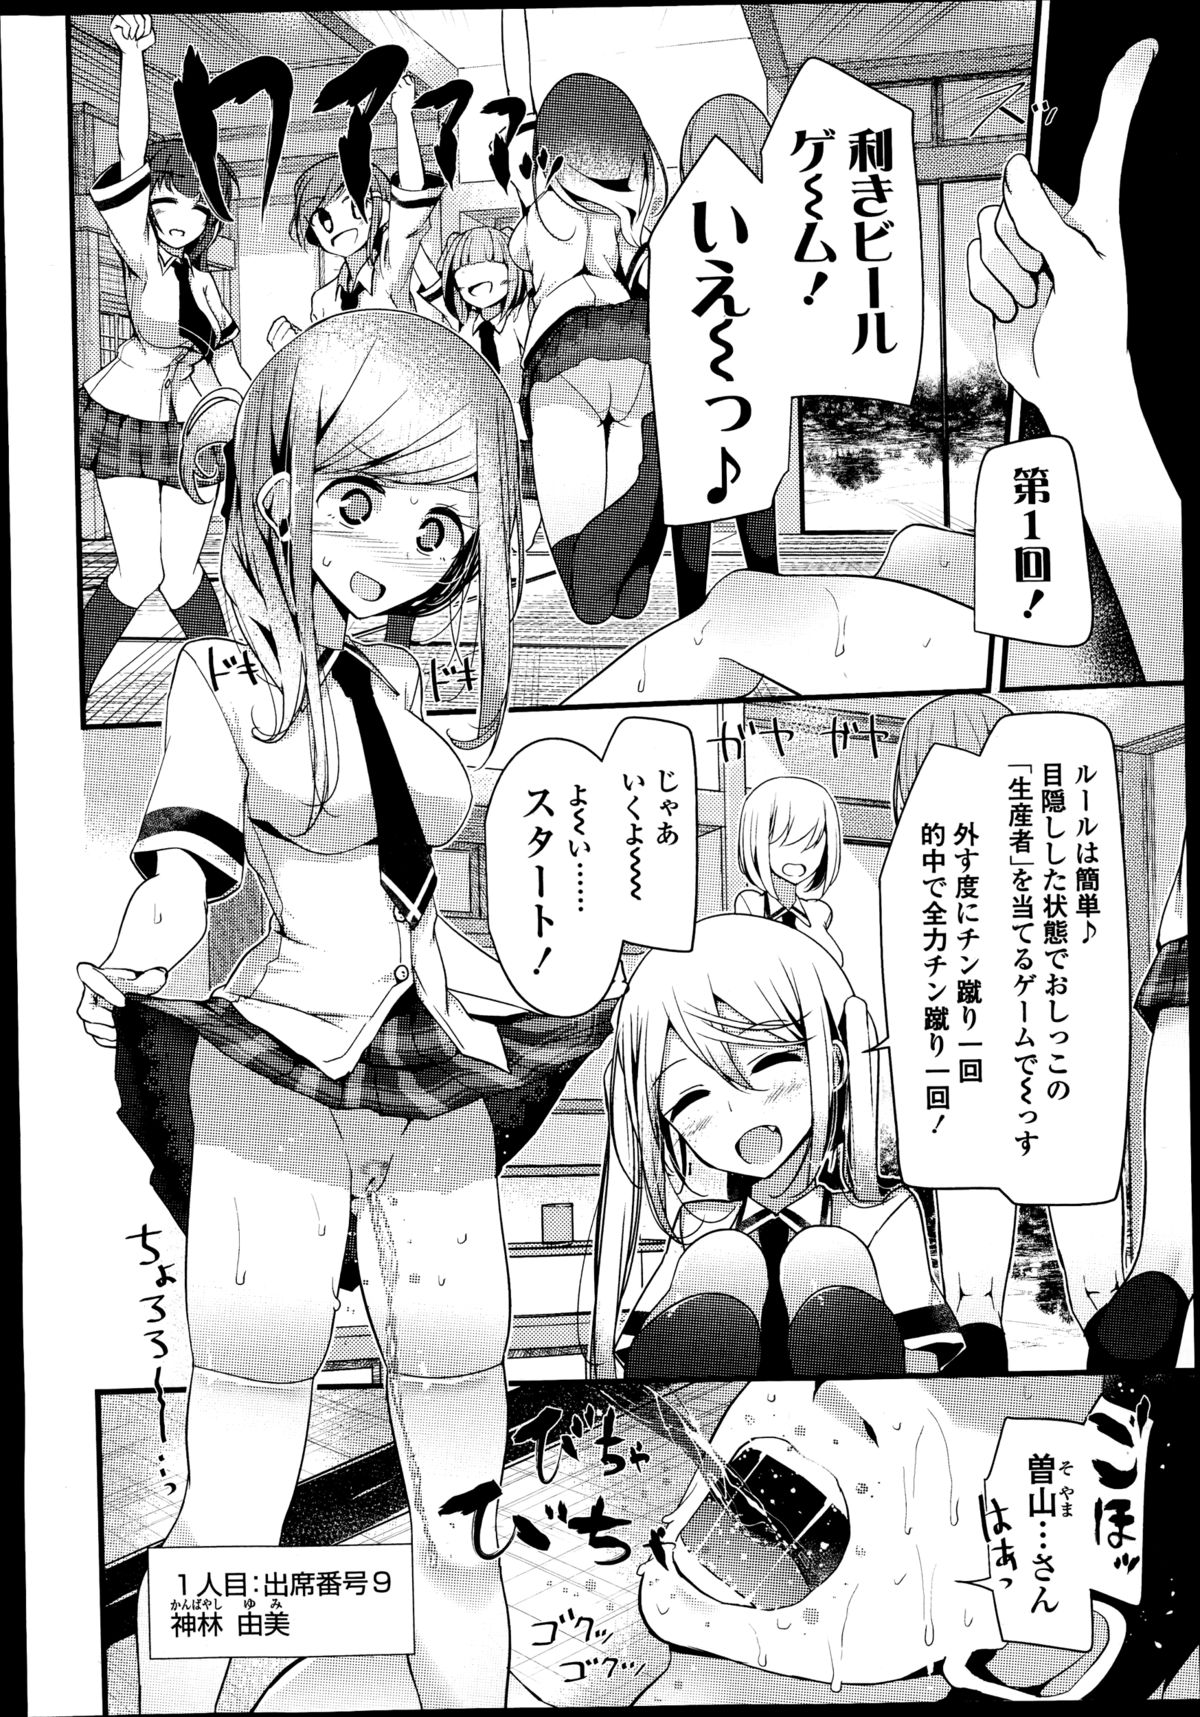 Girls forM Vol. 08 page 38 full